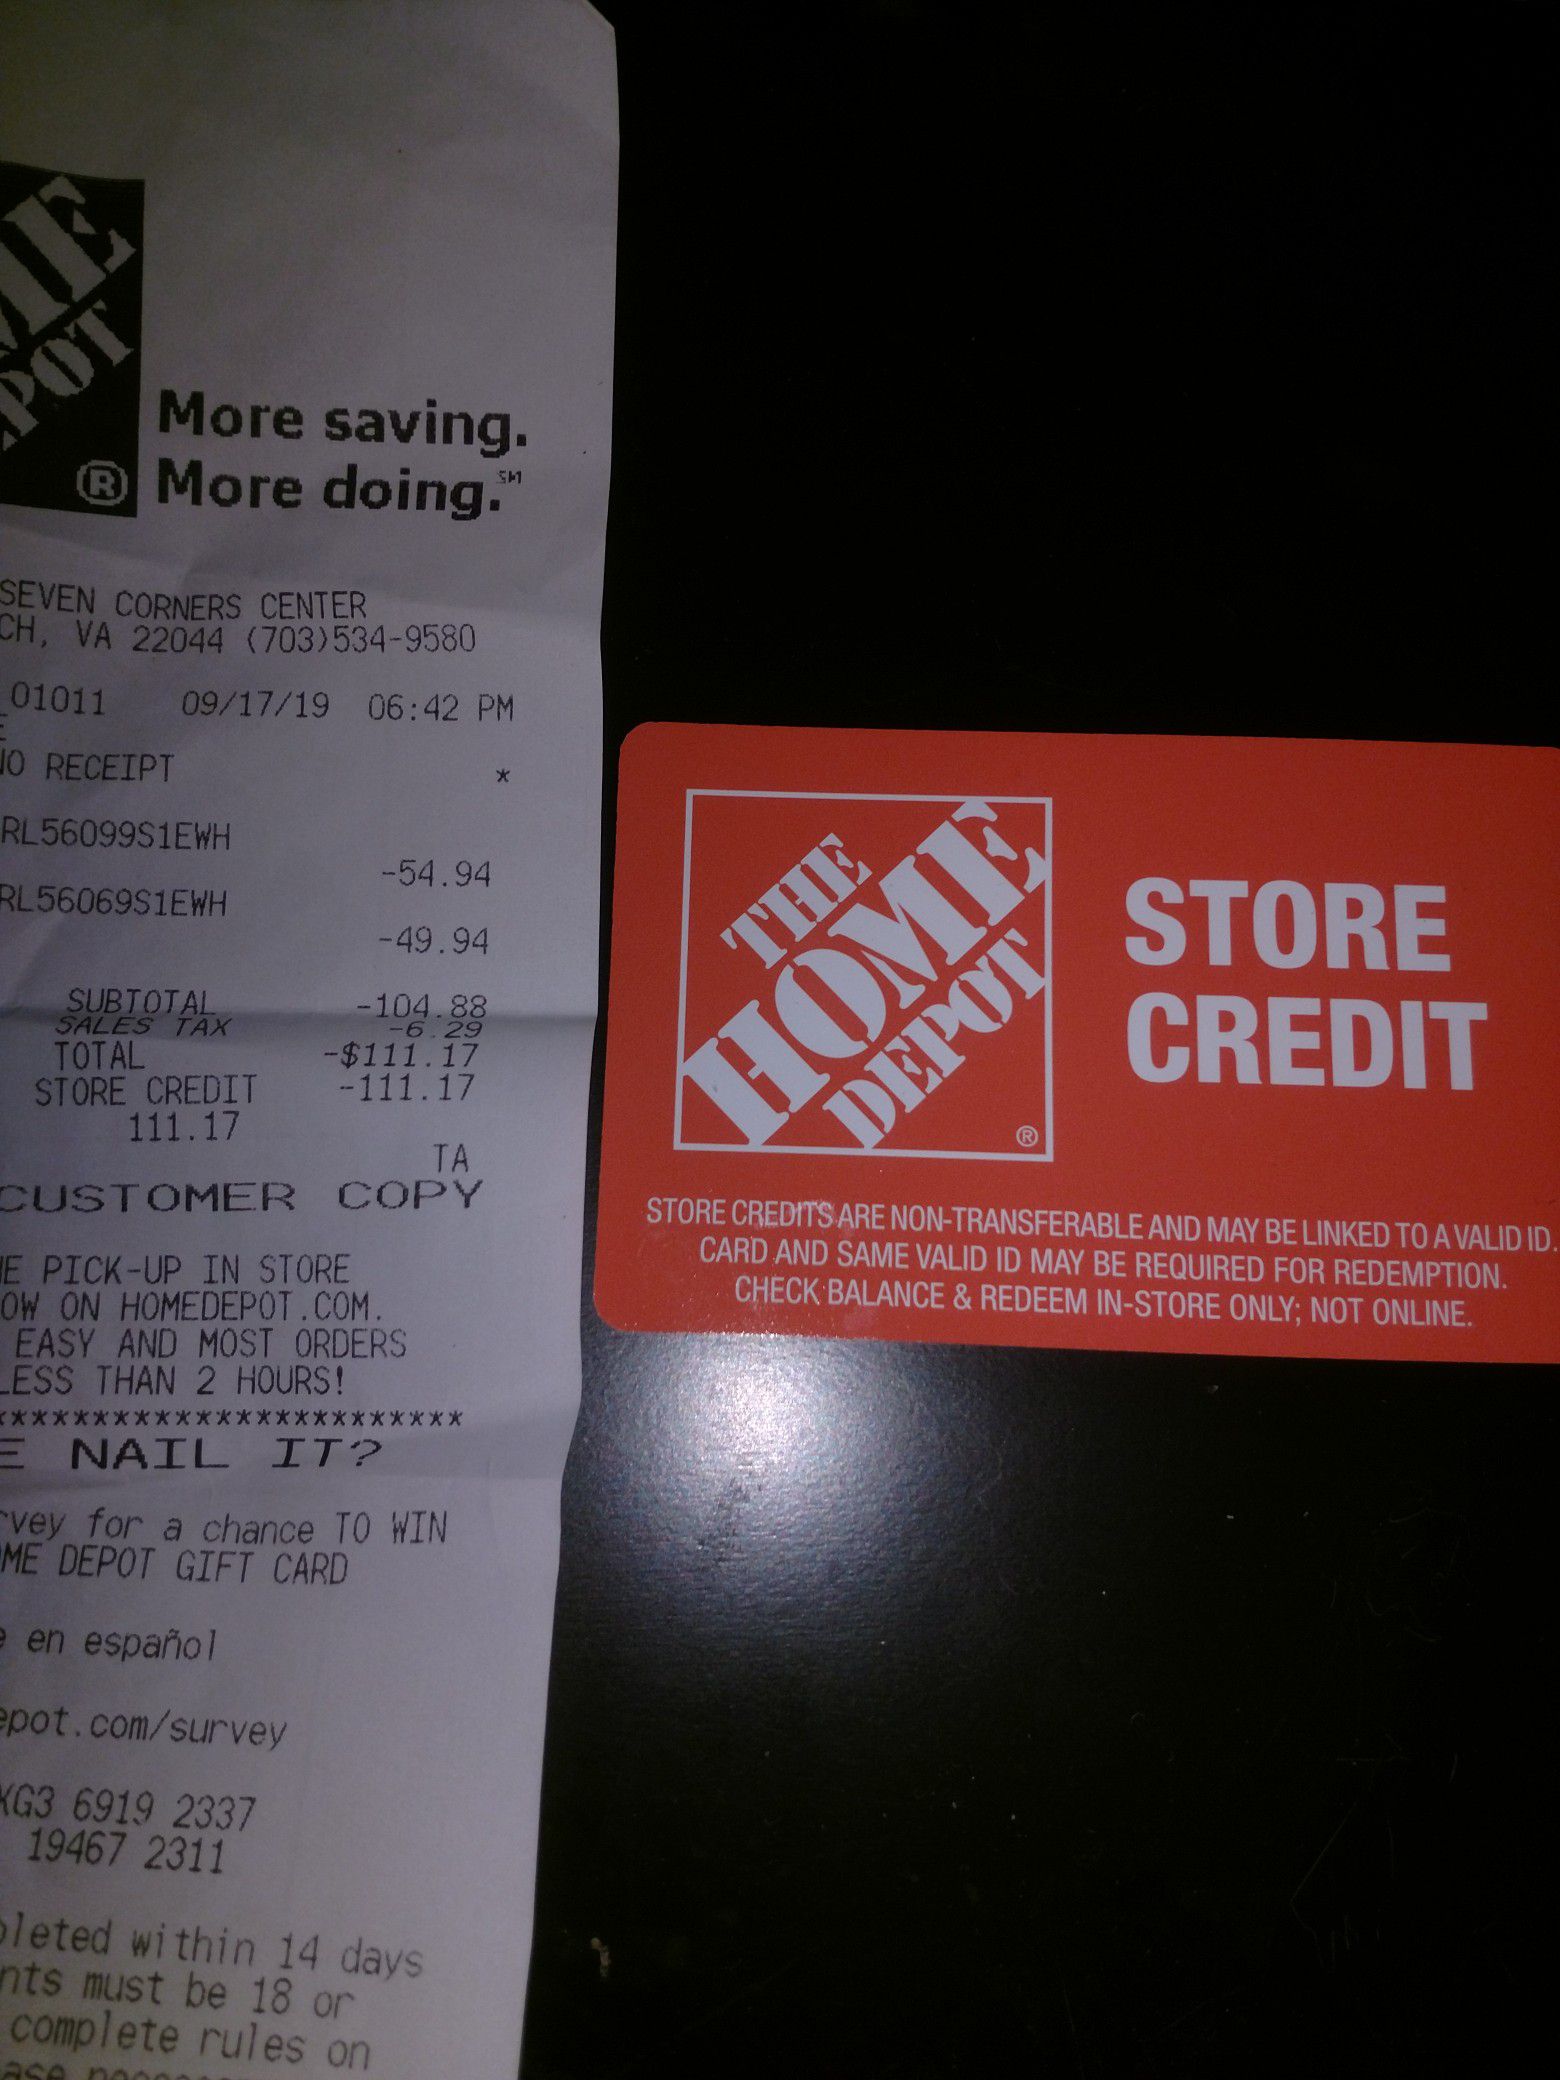 Home Depot Store Credit $111